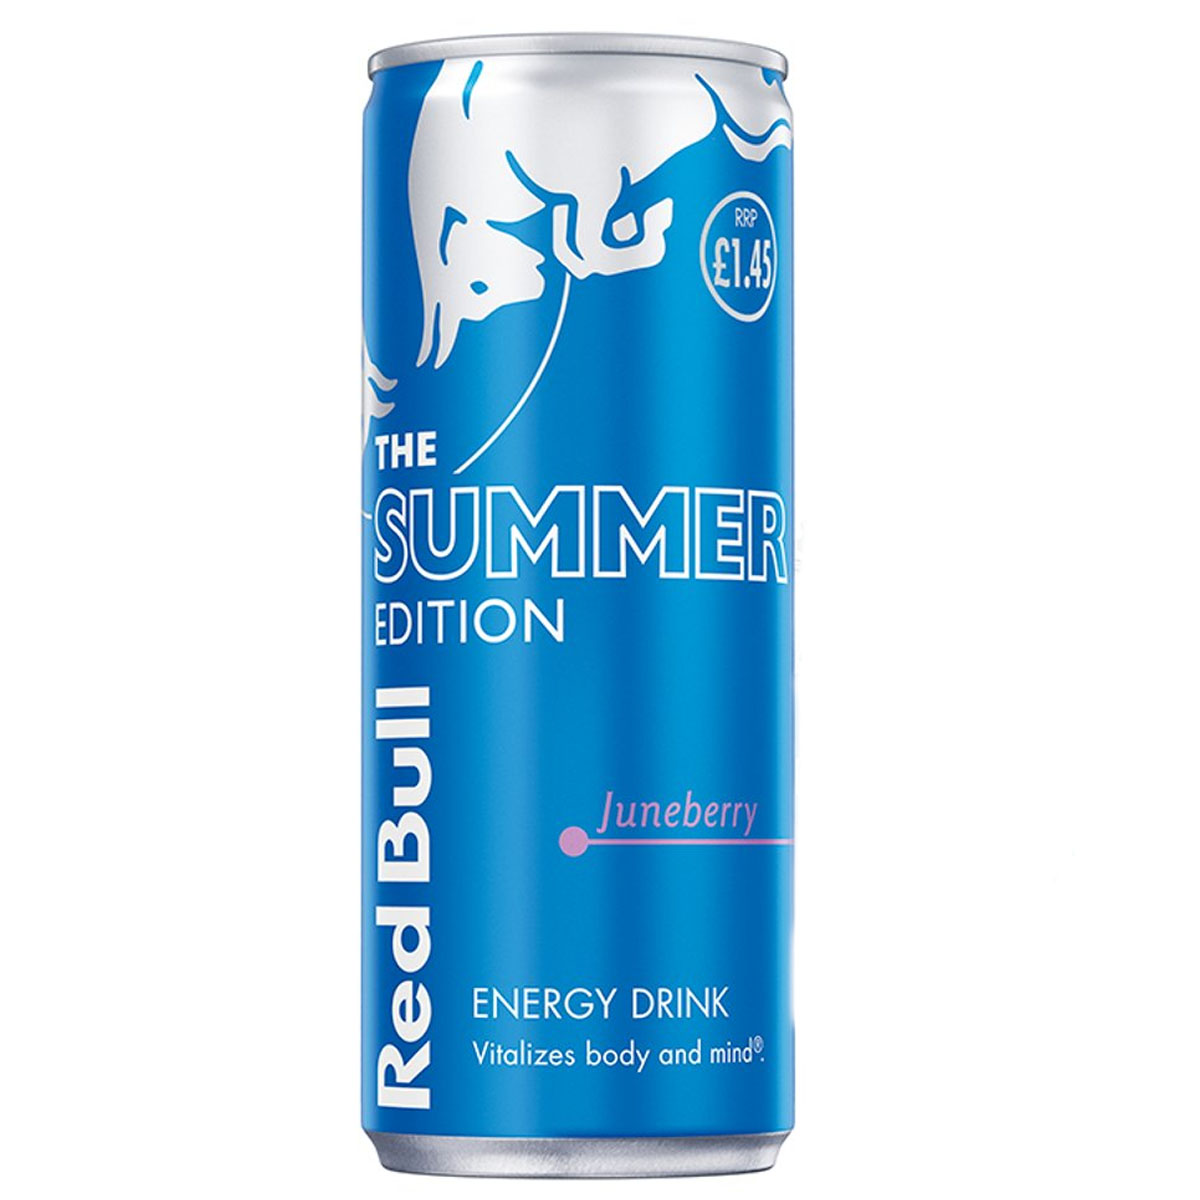 Red Bull - Energy Drink Summer Edition Juneberry - 250ml is the summer edition.